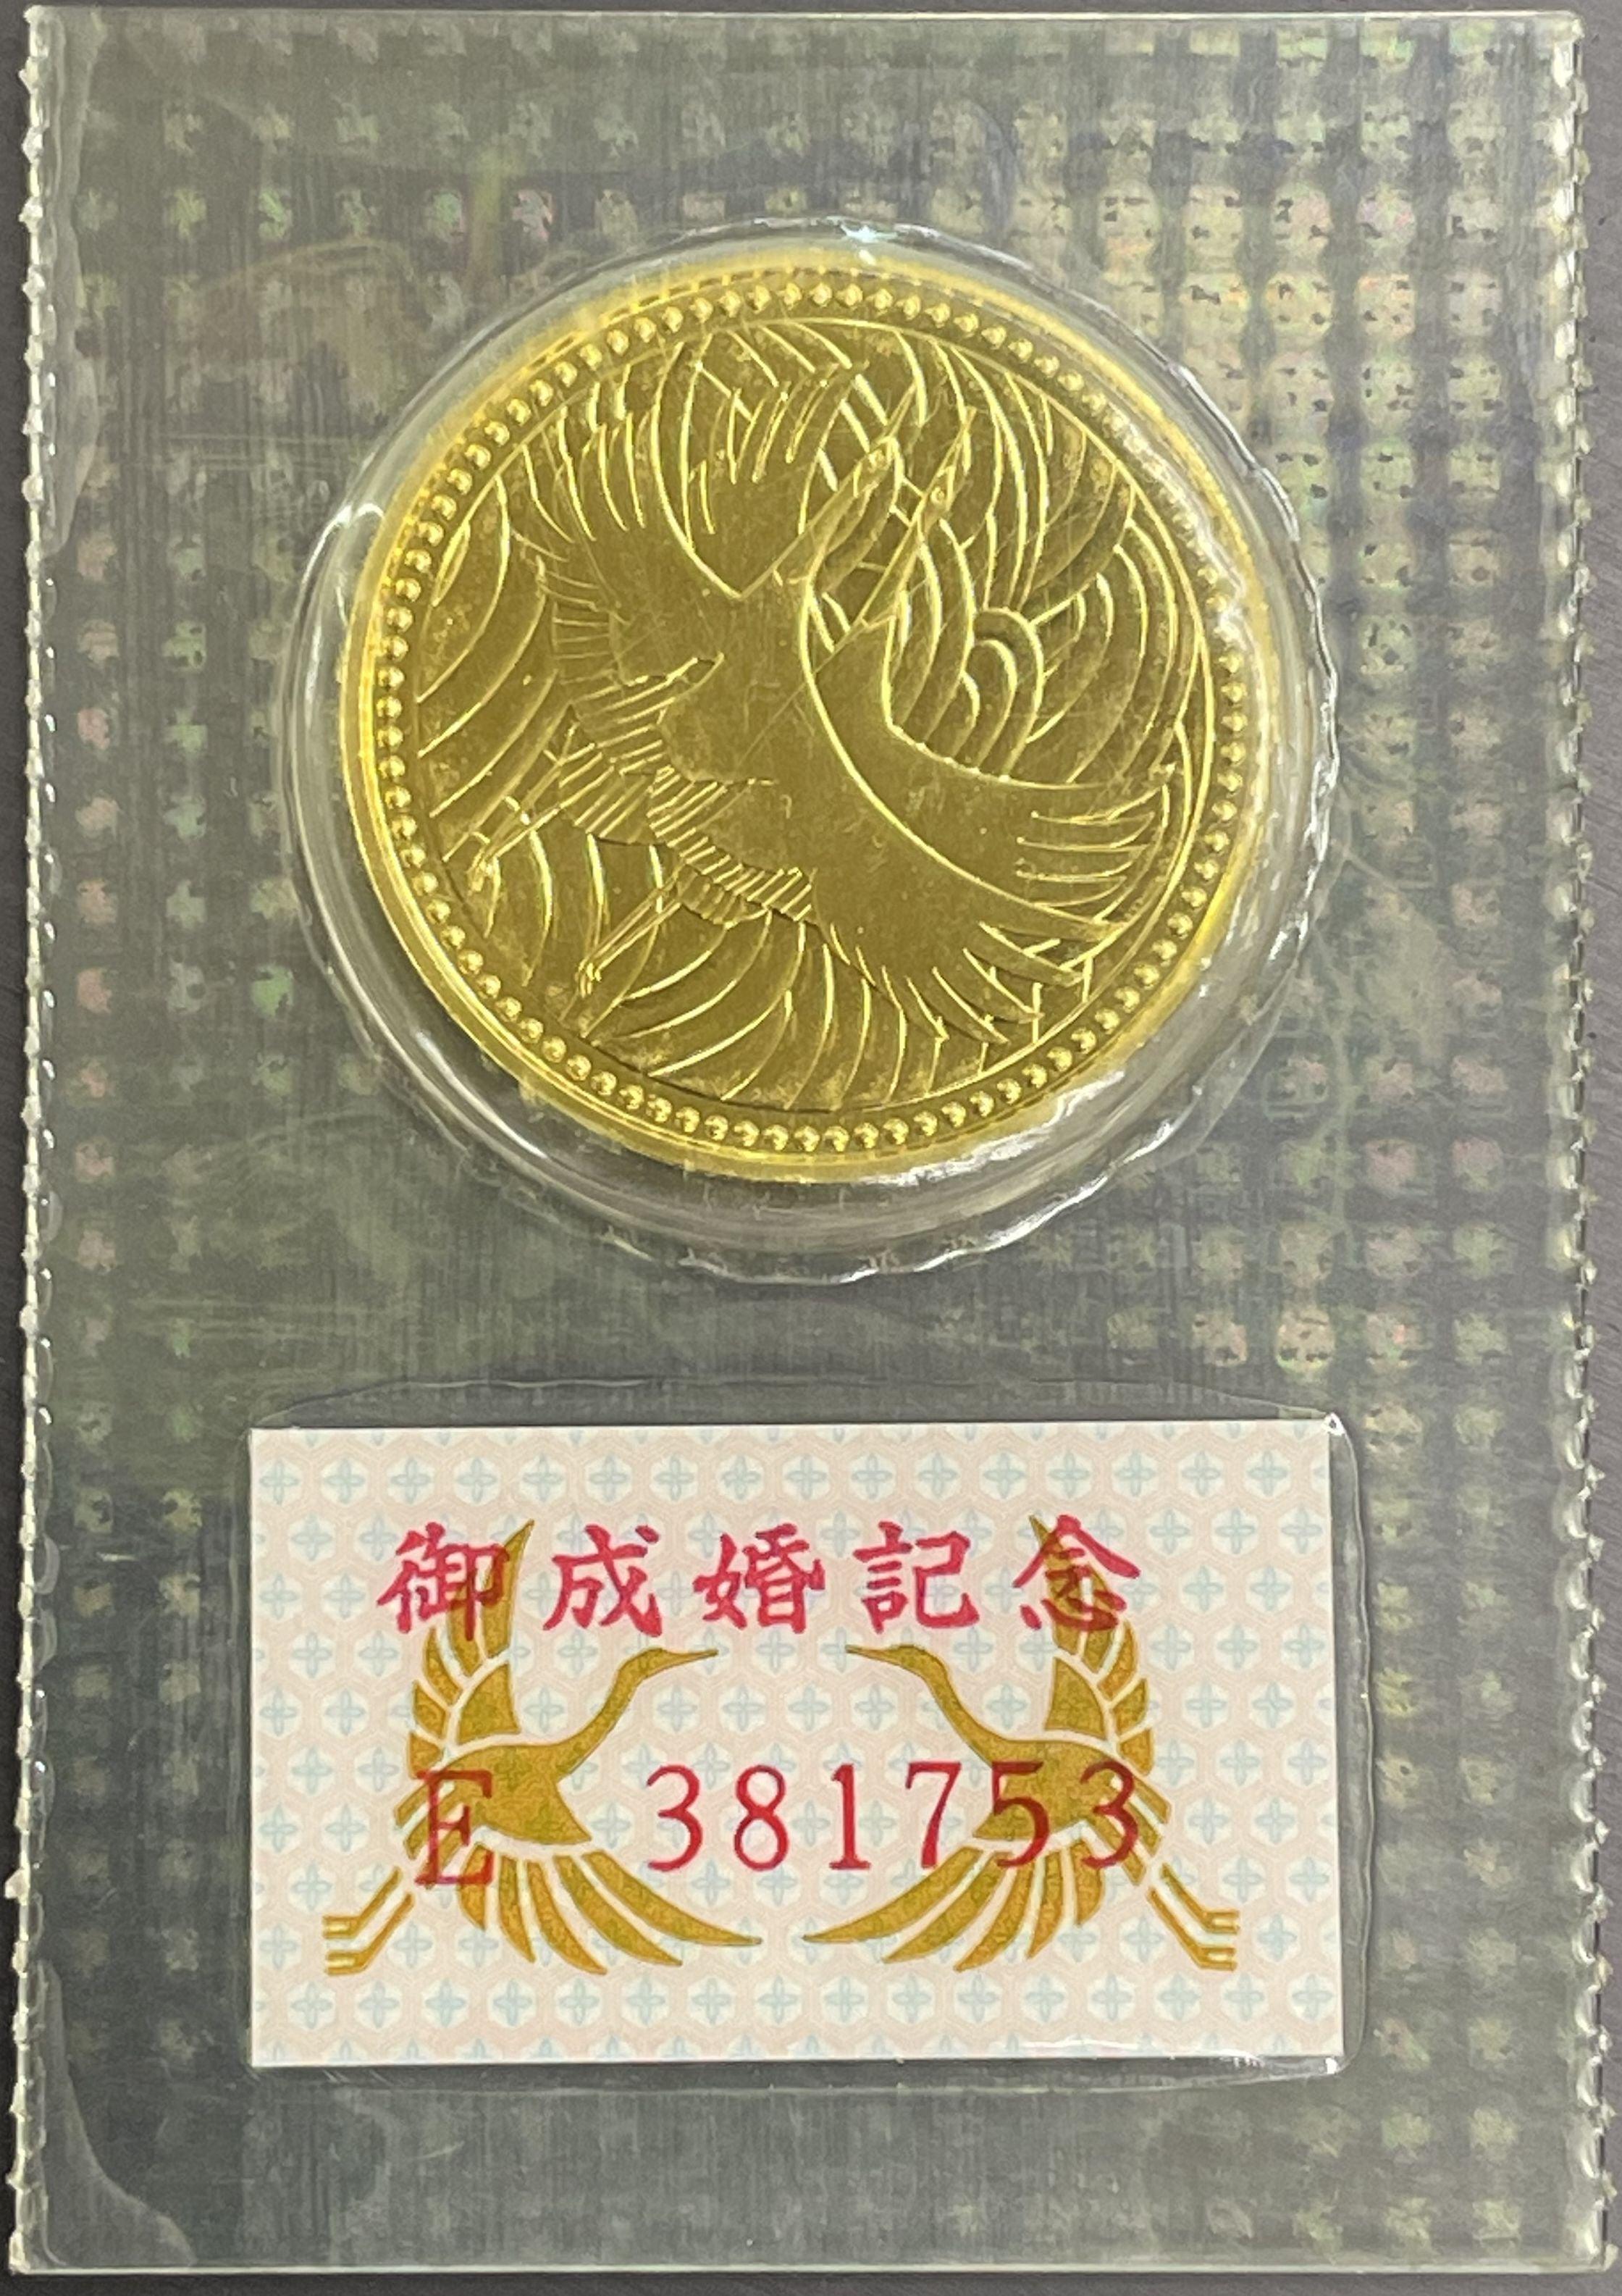 Crown Prince's wedding commemoration 50,000 yen gold coin 1993